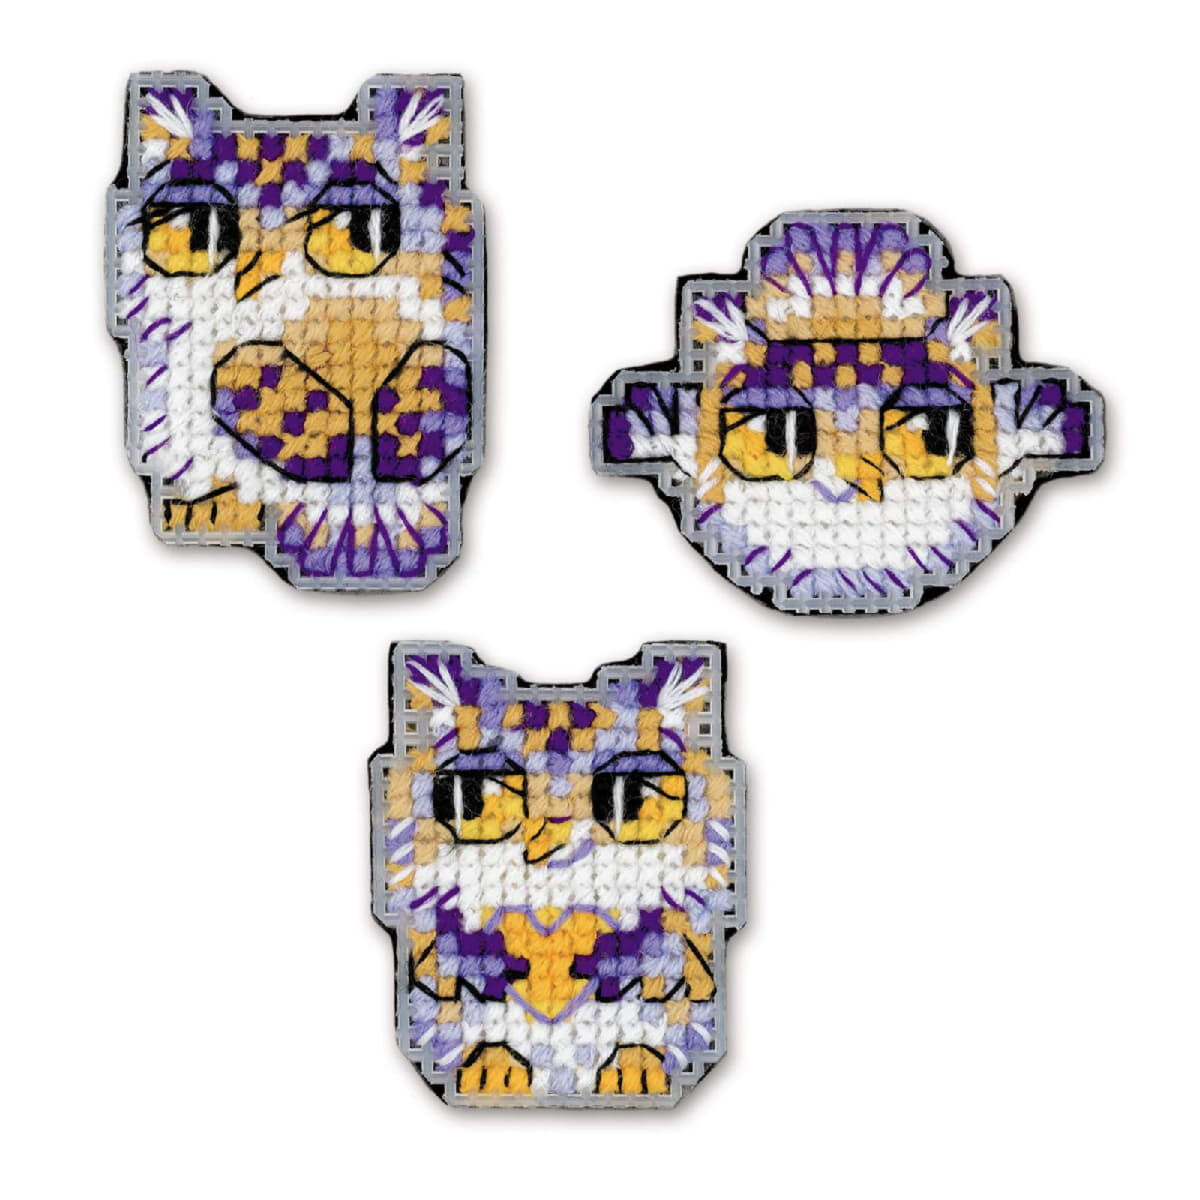 Riolis counted cross stitch kit "Magnets Owlets Set...